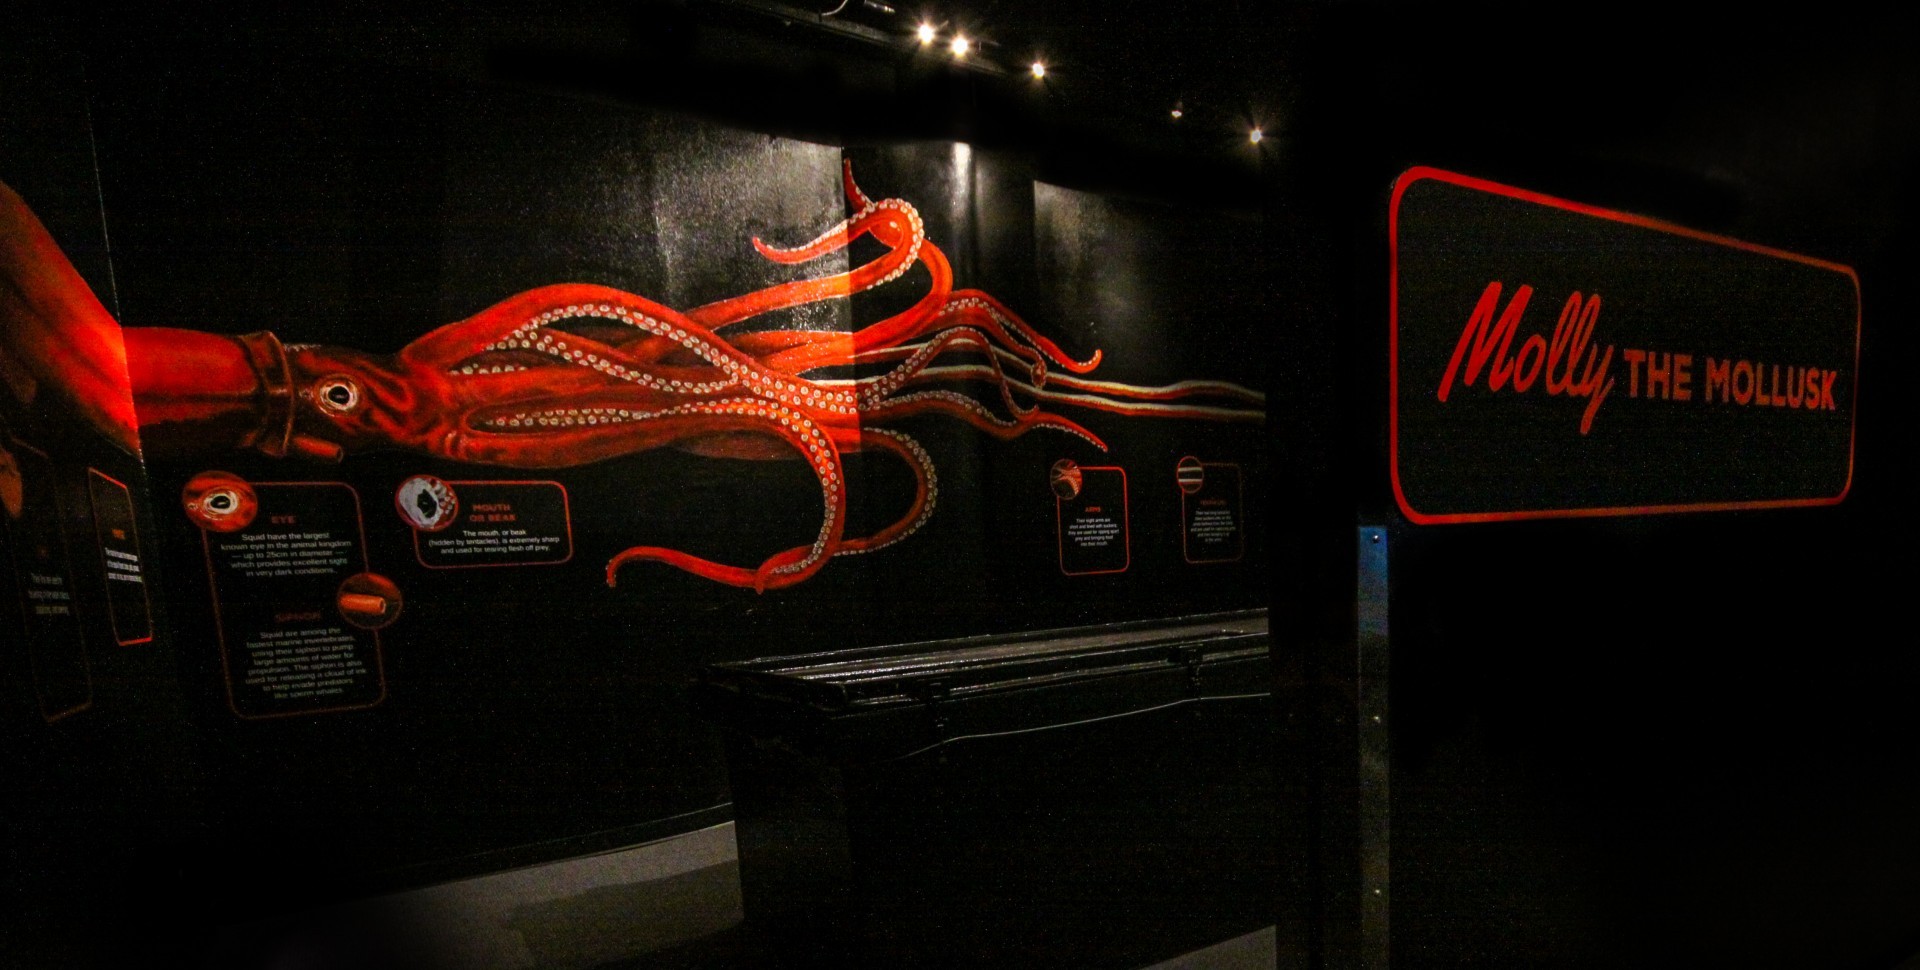 A giant squid mural with a red squid on a black background and letters saying "Molly the mollusk" in the Exploration Gallery at Mote Aquarium